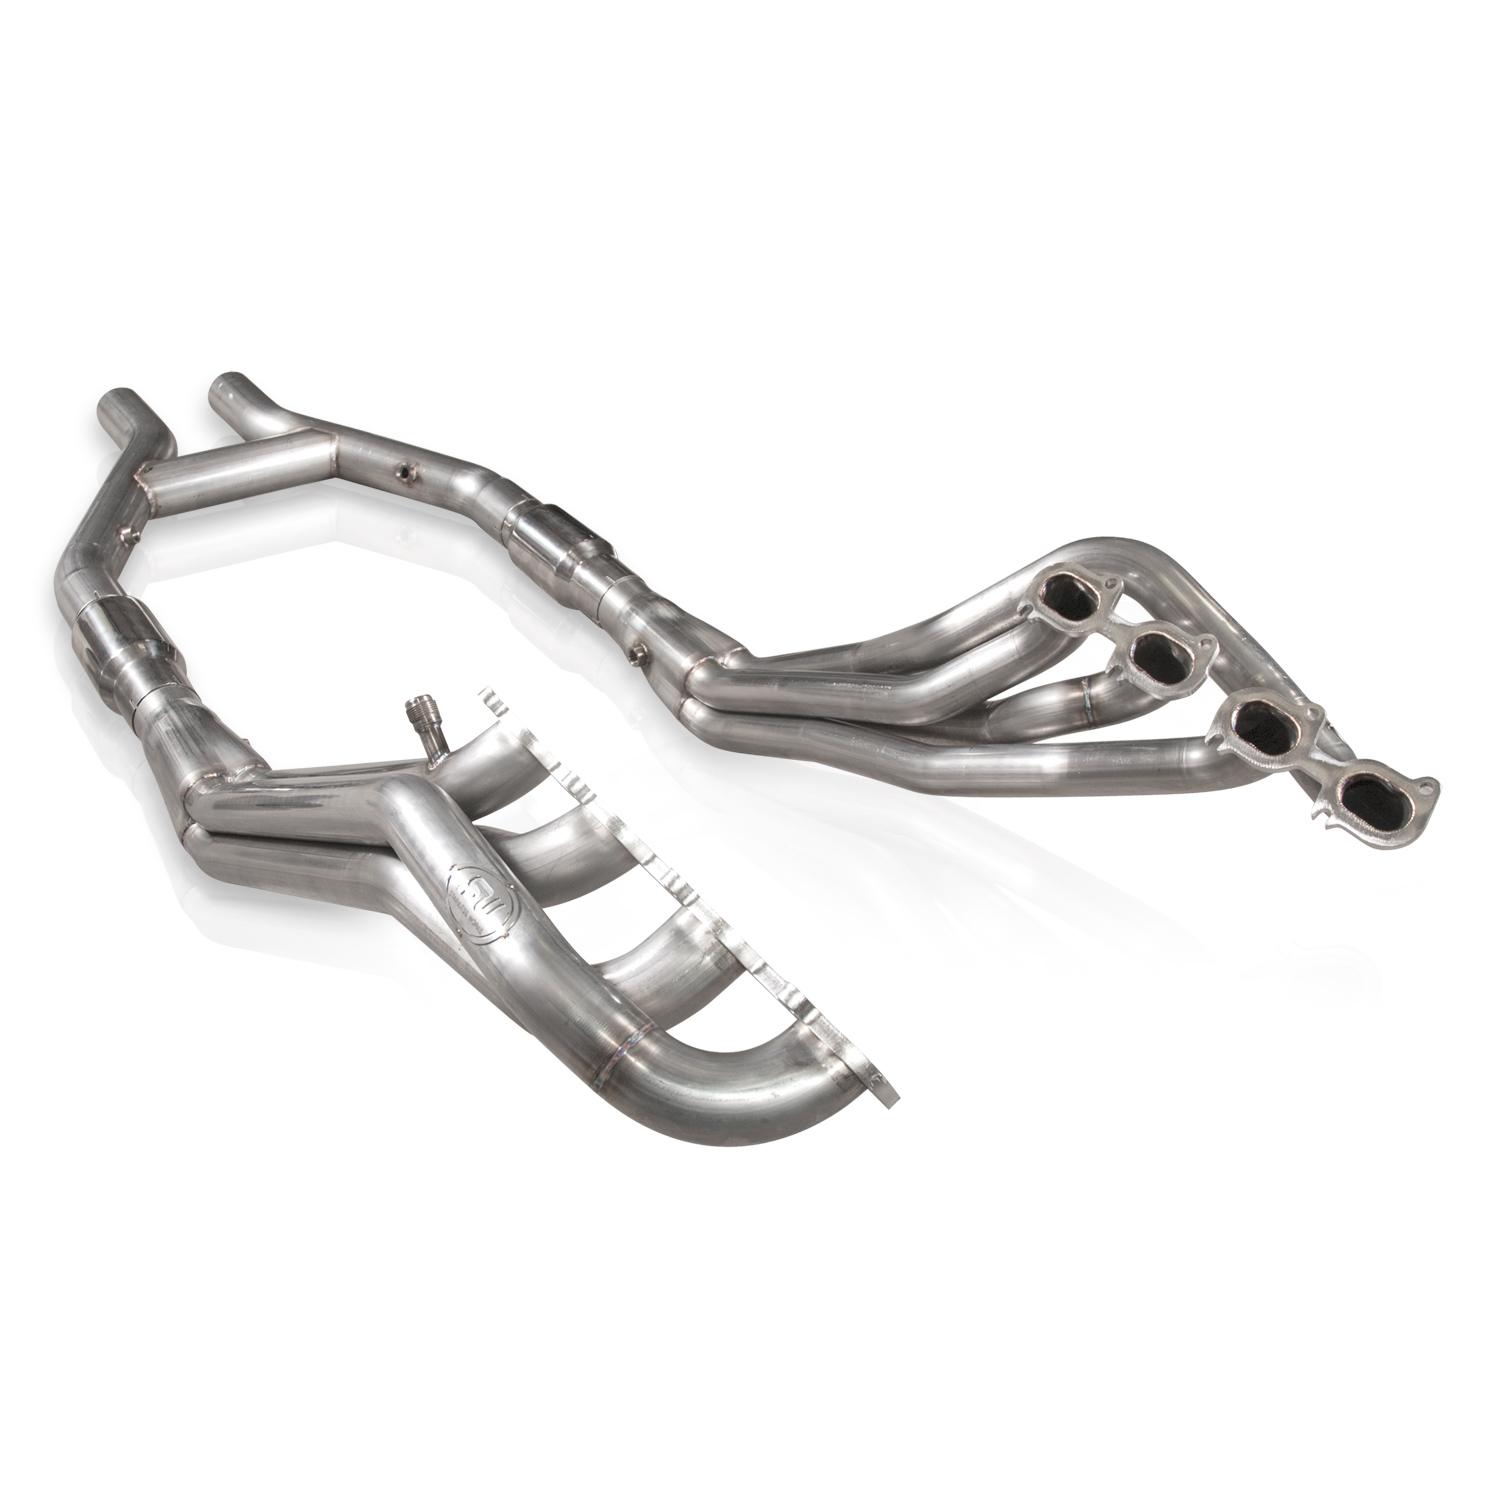 2007-2014 Ford Mustang GT500 Stainless Works 1 7/8" Long Tube Headers w/3" Collectors & 3" Catted Hpipe